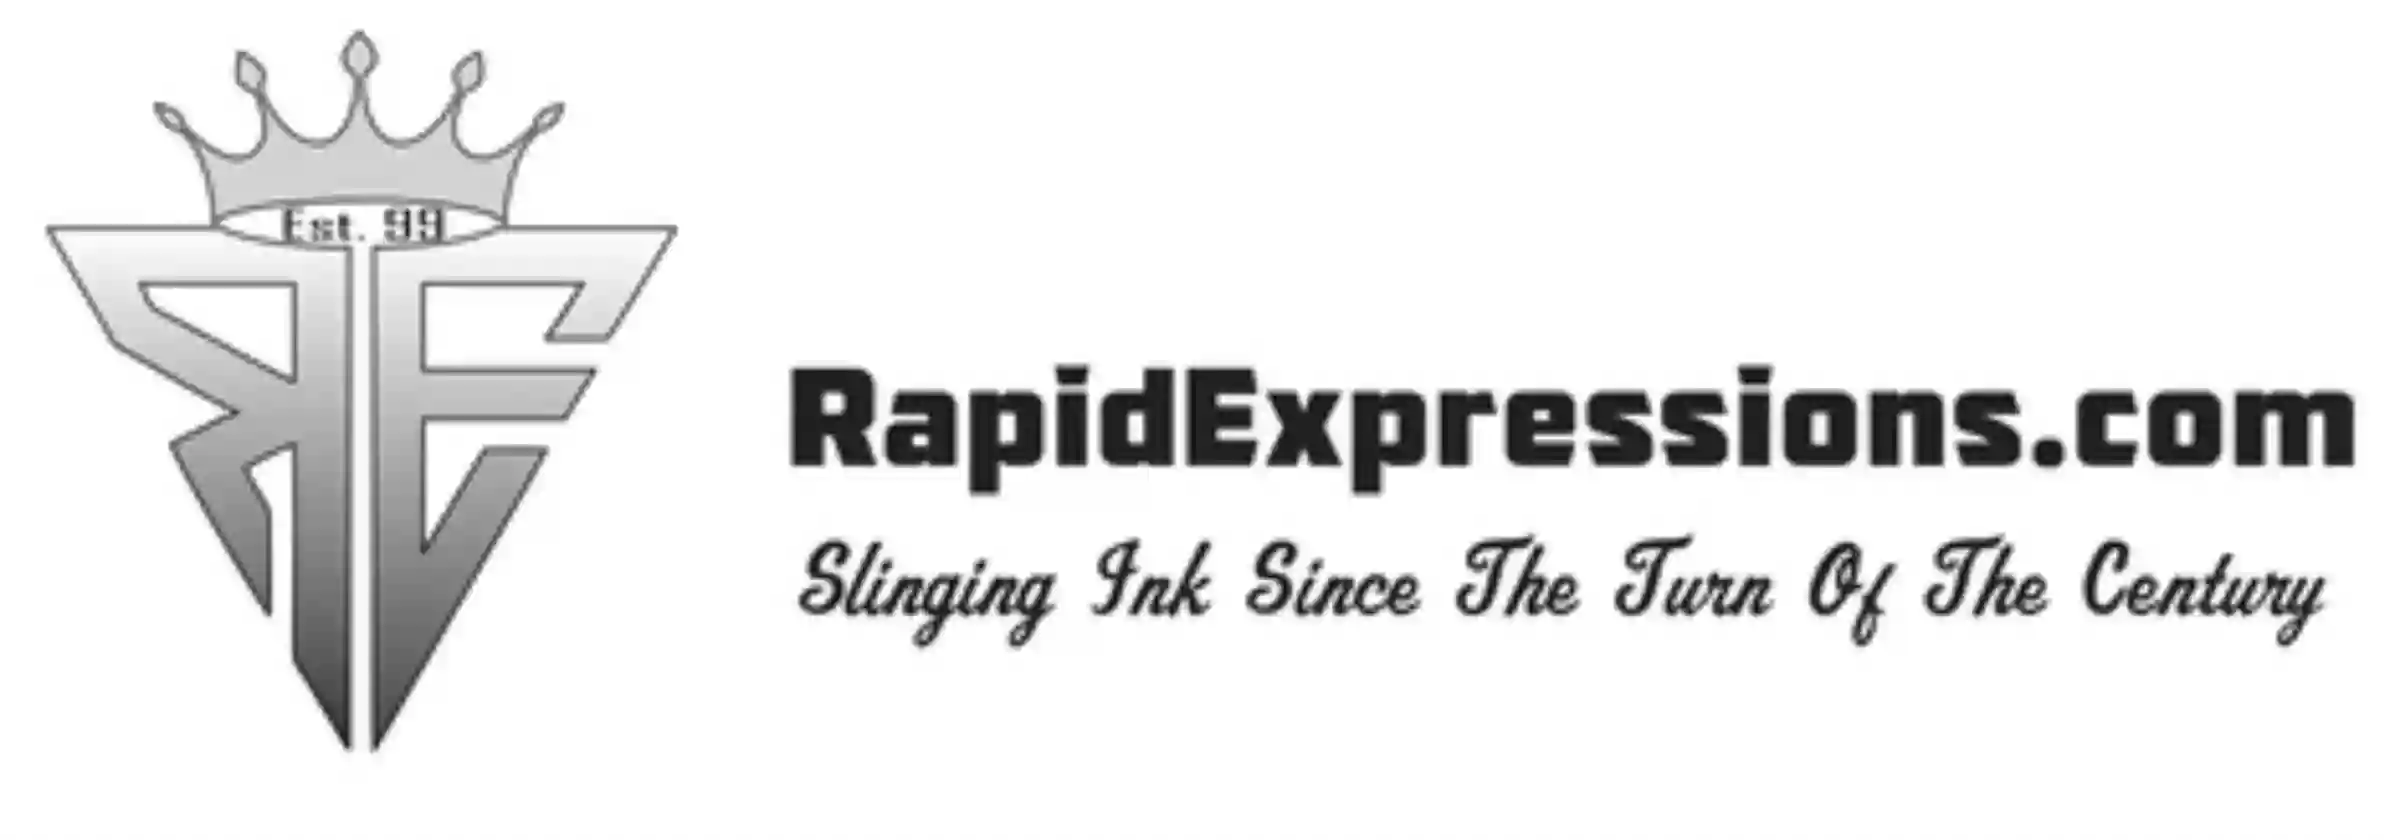 Rapid Expressions